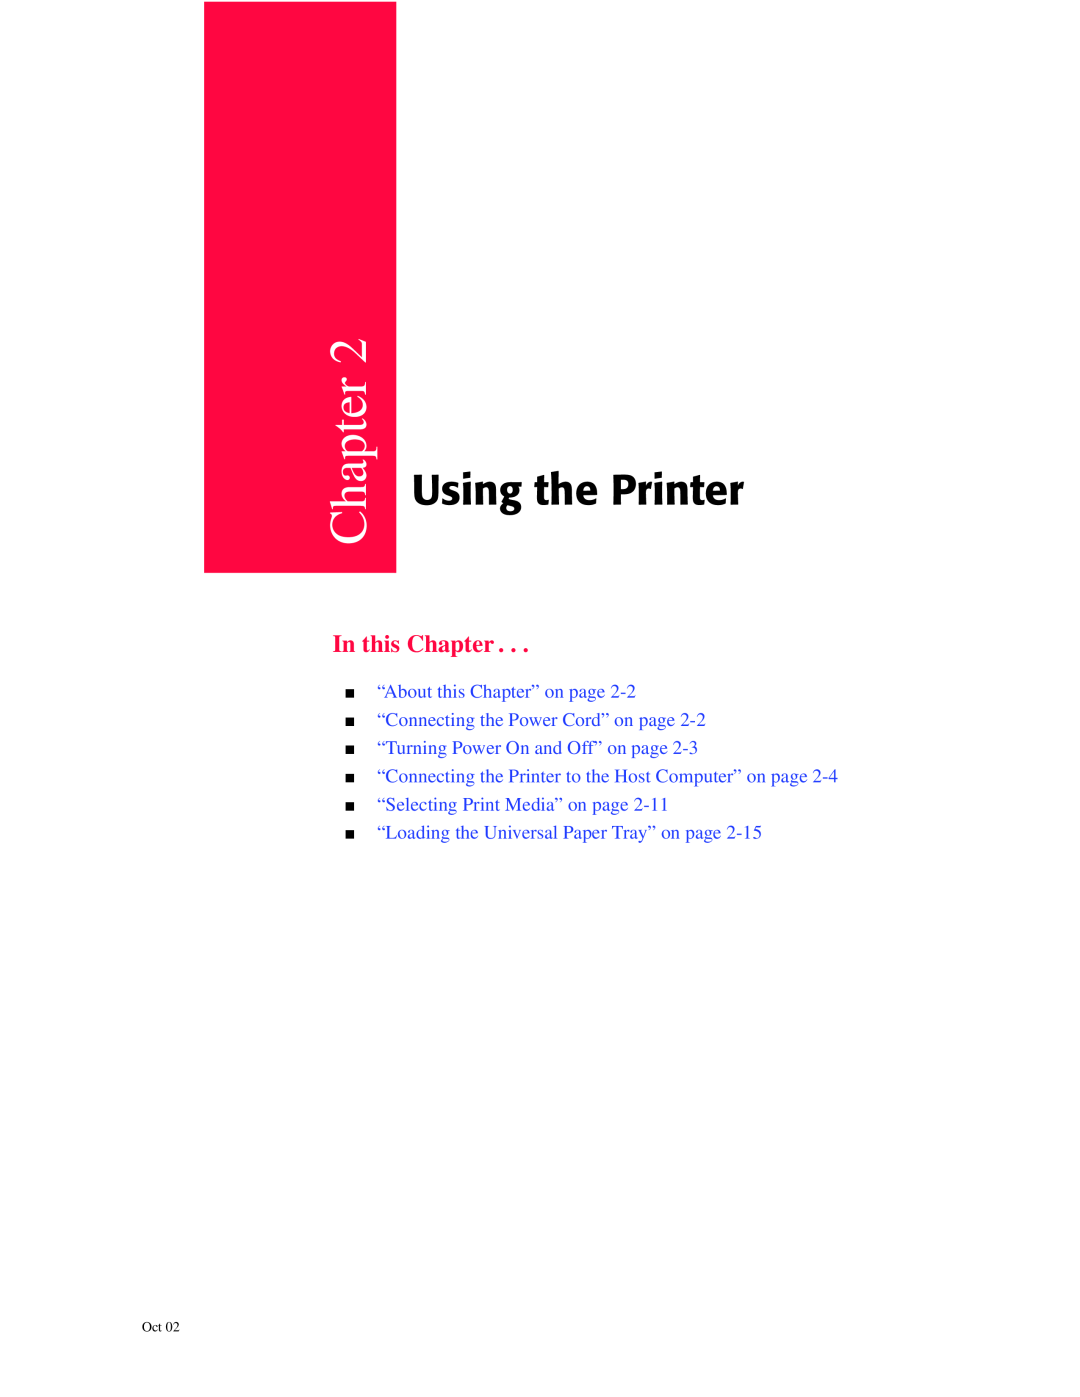 Oki 6100 manual Using the Printer, In this Chapter, “About this Chapter” on page “Connecting the Power Cord” on page 